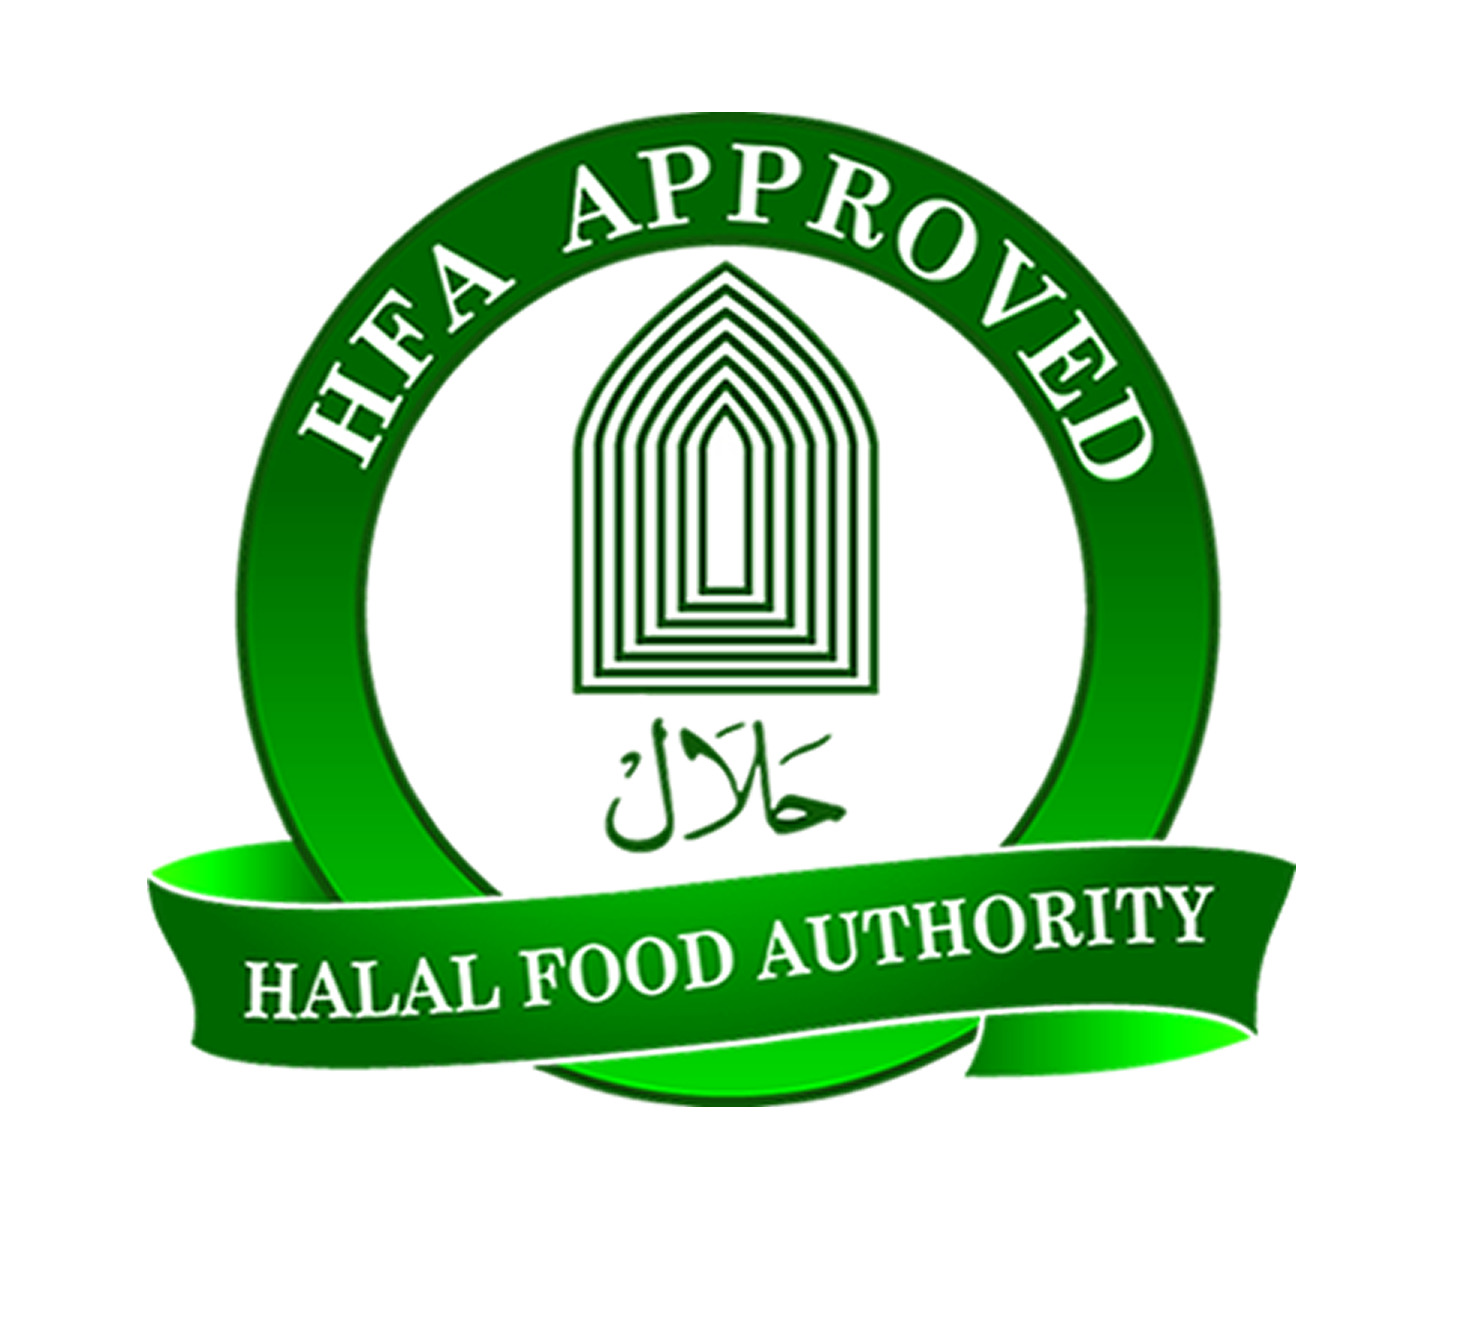 Halal food authority (hfa) approved certification emblem.